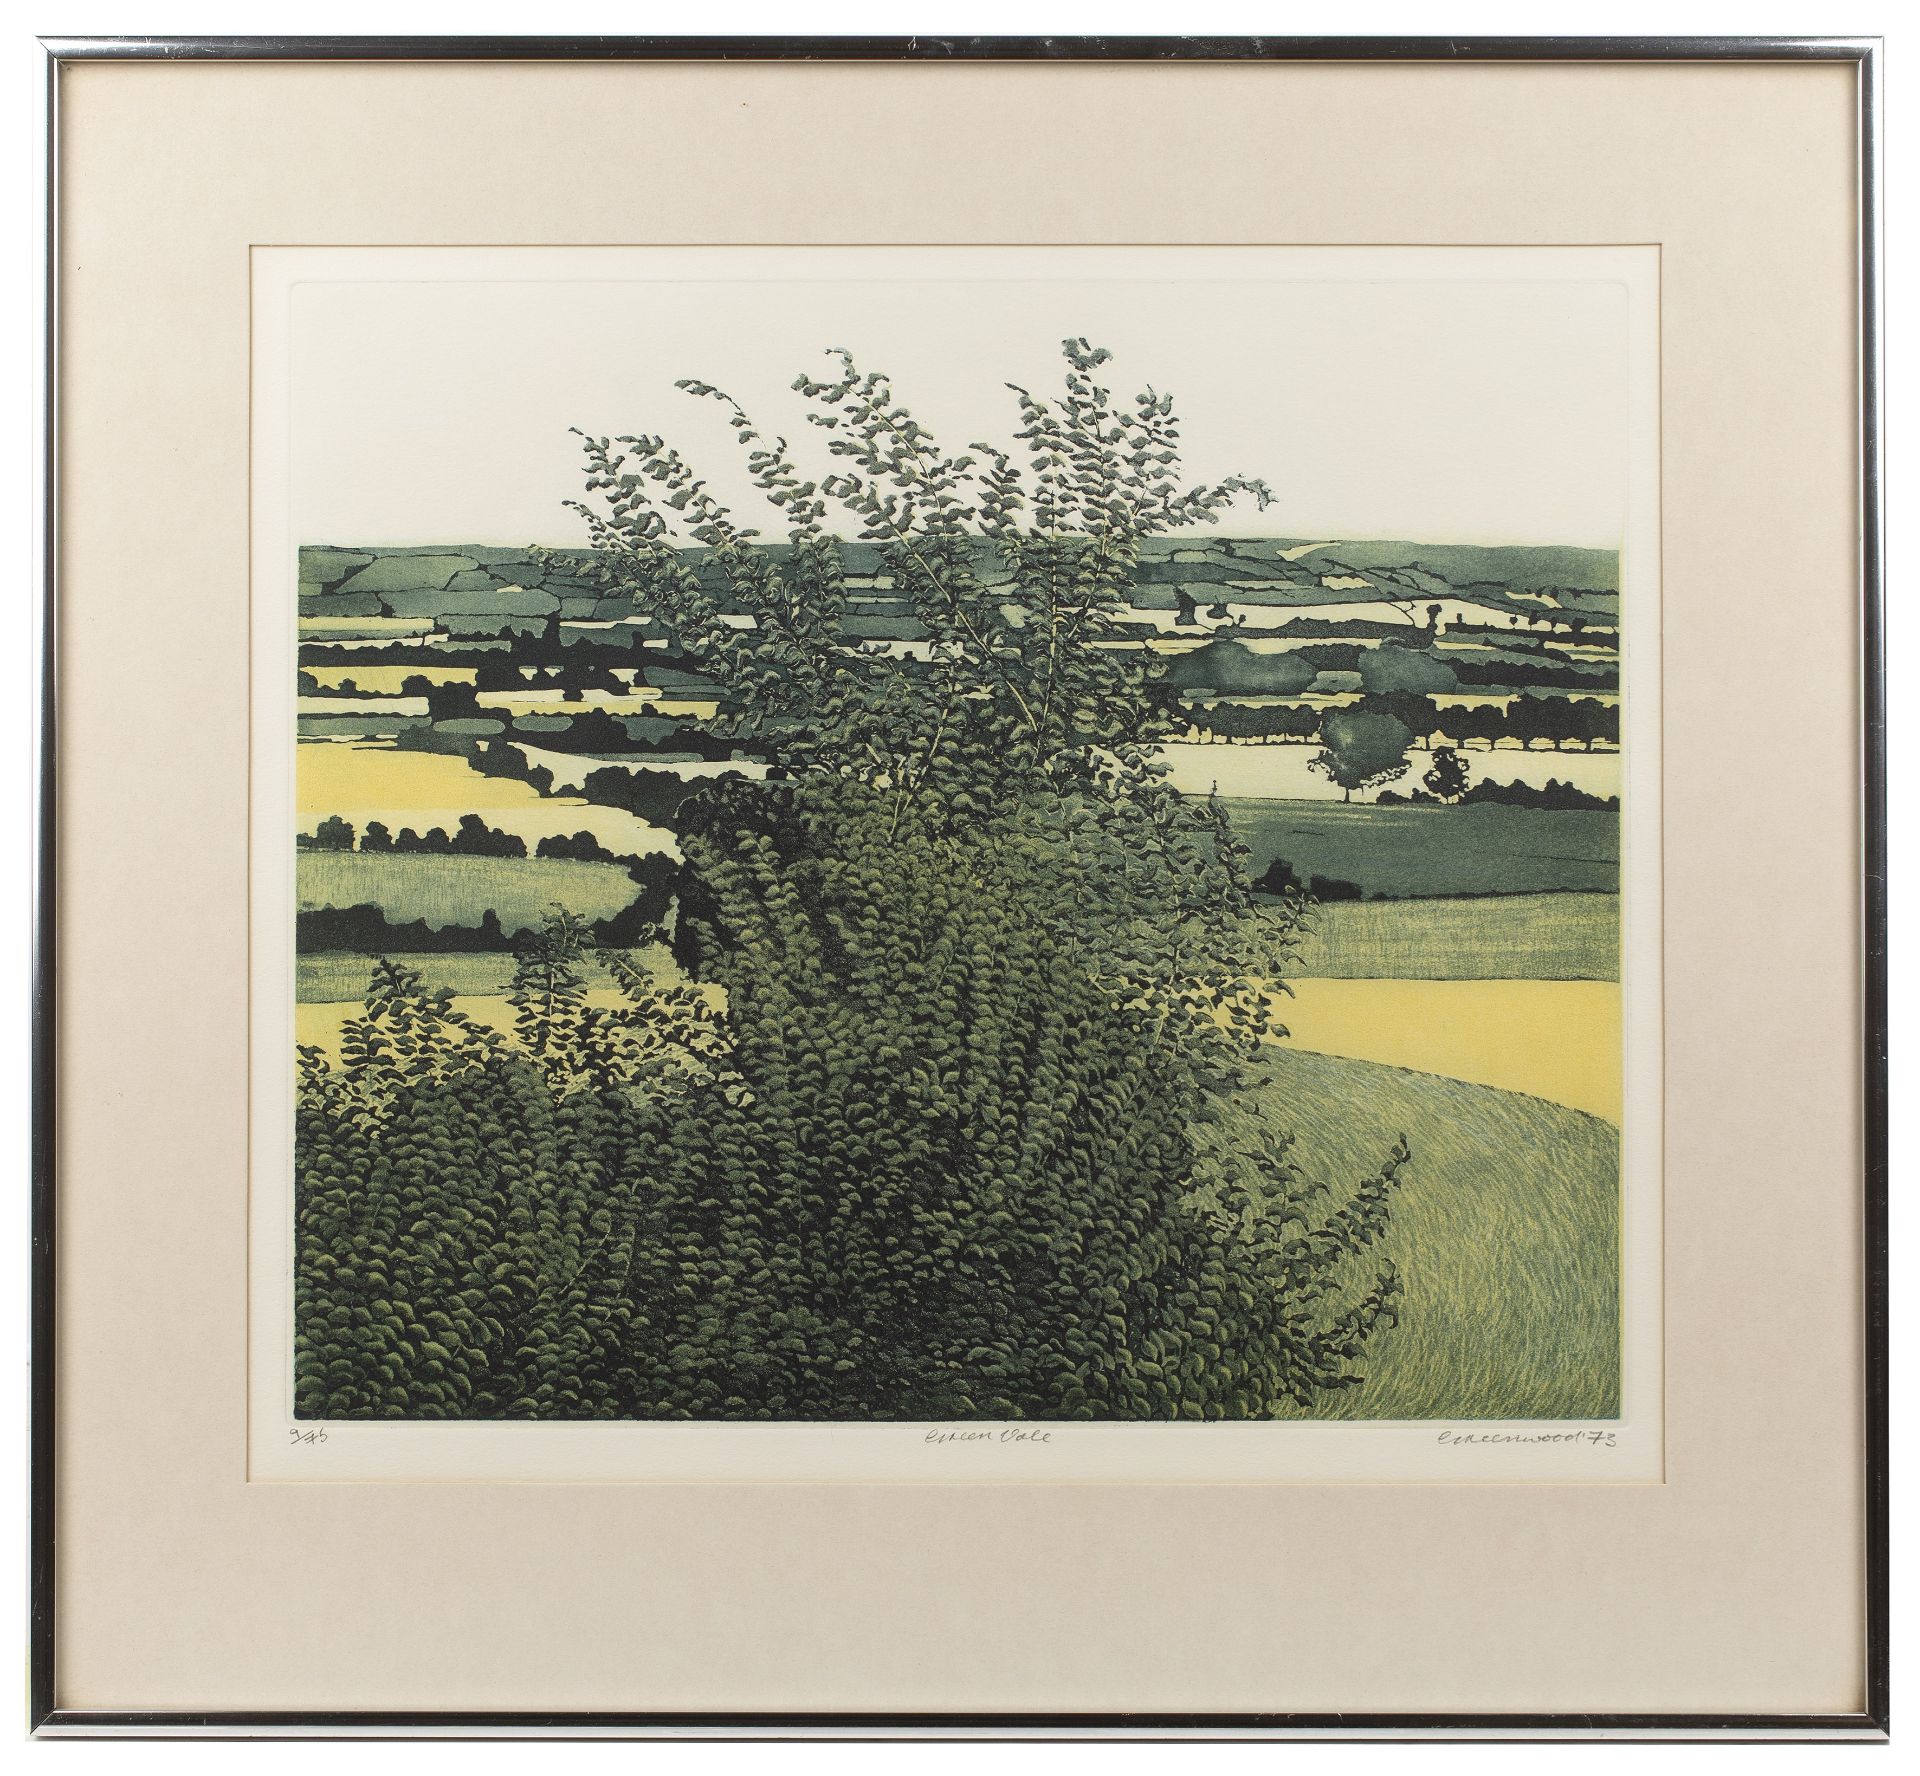 Philip Greenwood (b.1943) 'Green vale', etching and aquatint, numbered 9/75, signed and dated 1973 - Image 2 of 6